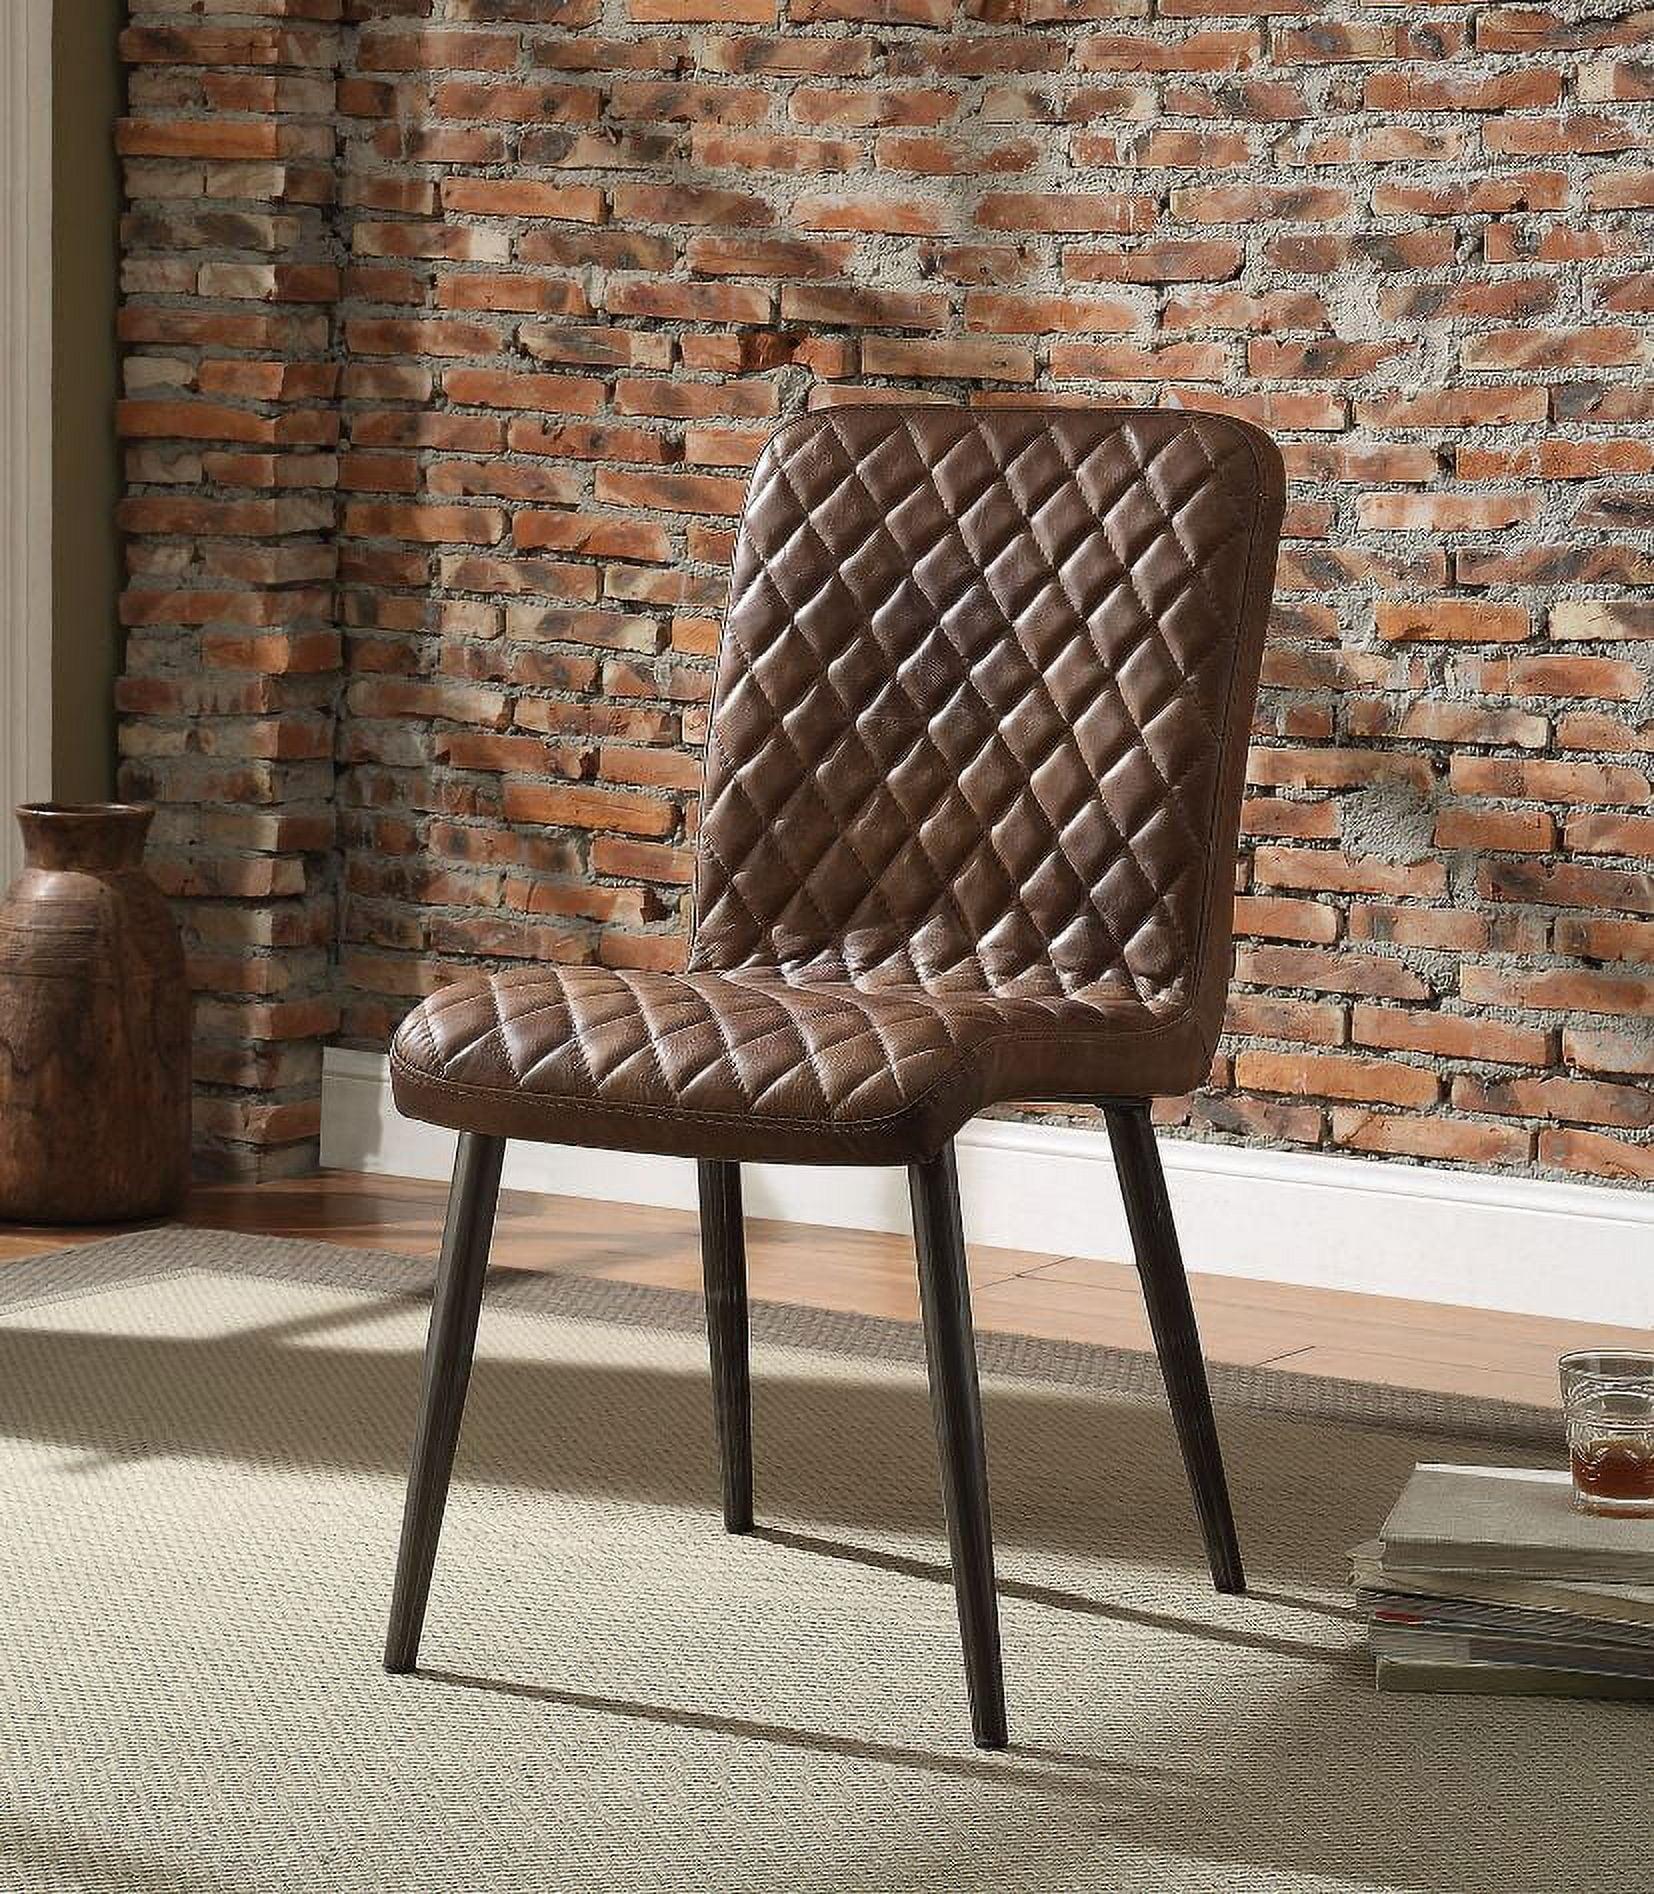 Low-Profile Vintage Chocolate Leather Side Chair with Metal Legs